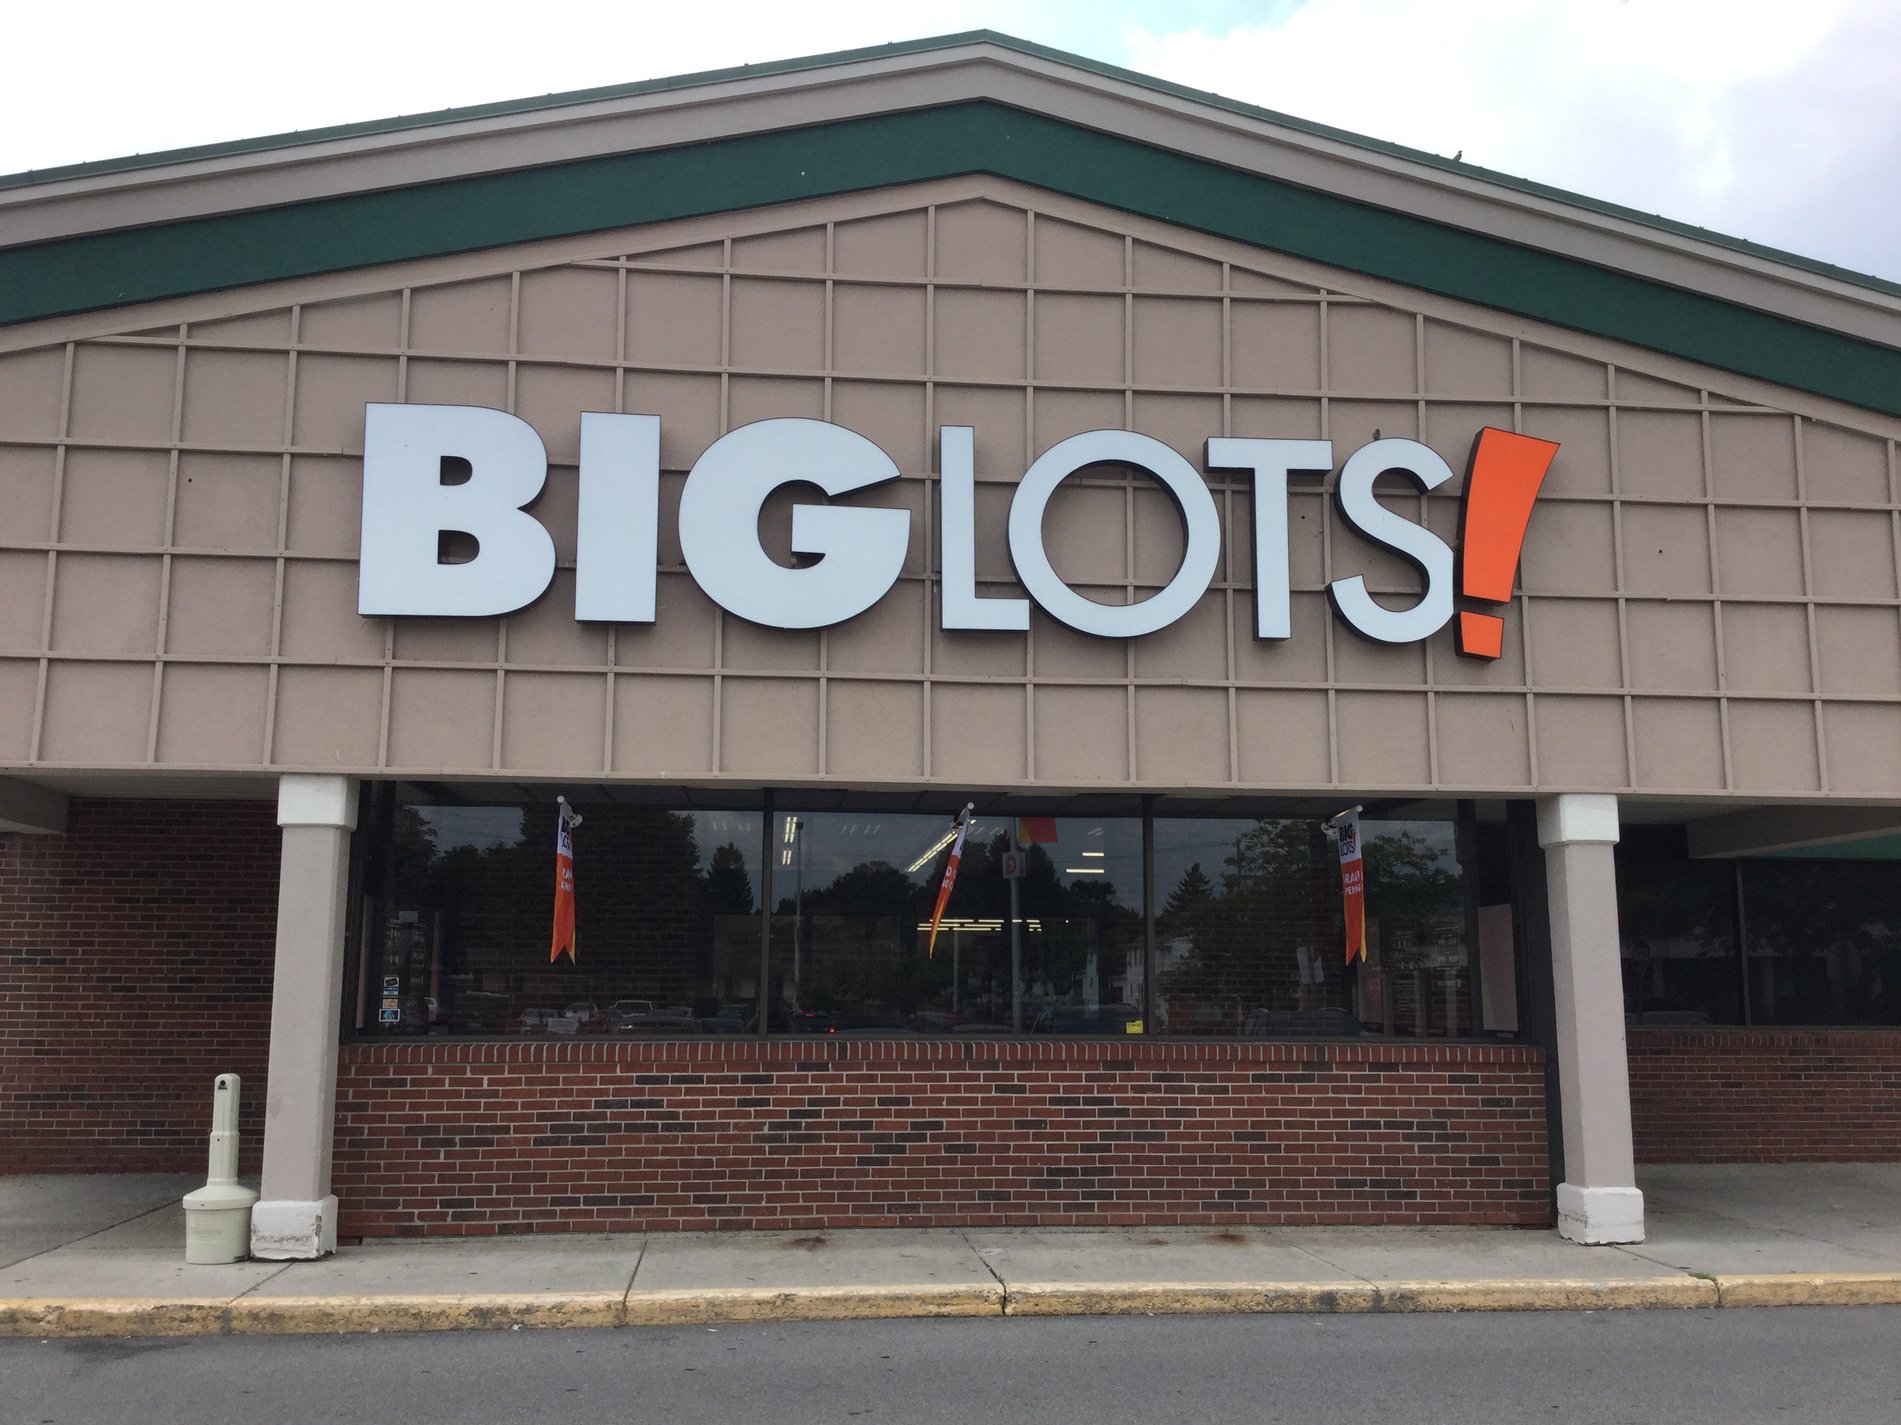 Visit The Big Lots in Depew, NY Located on Broadway